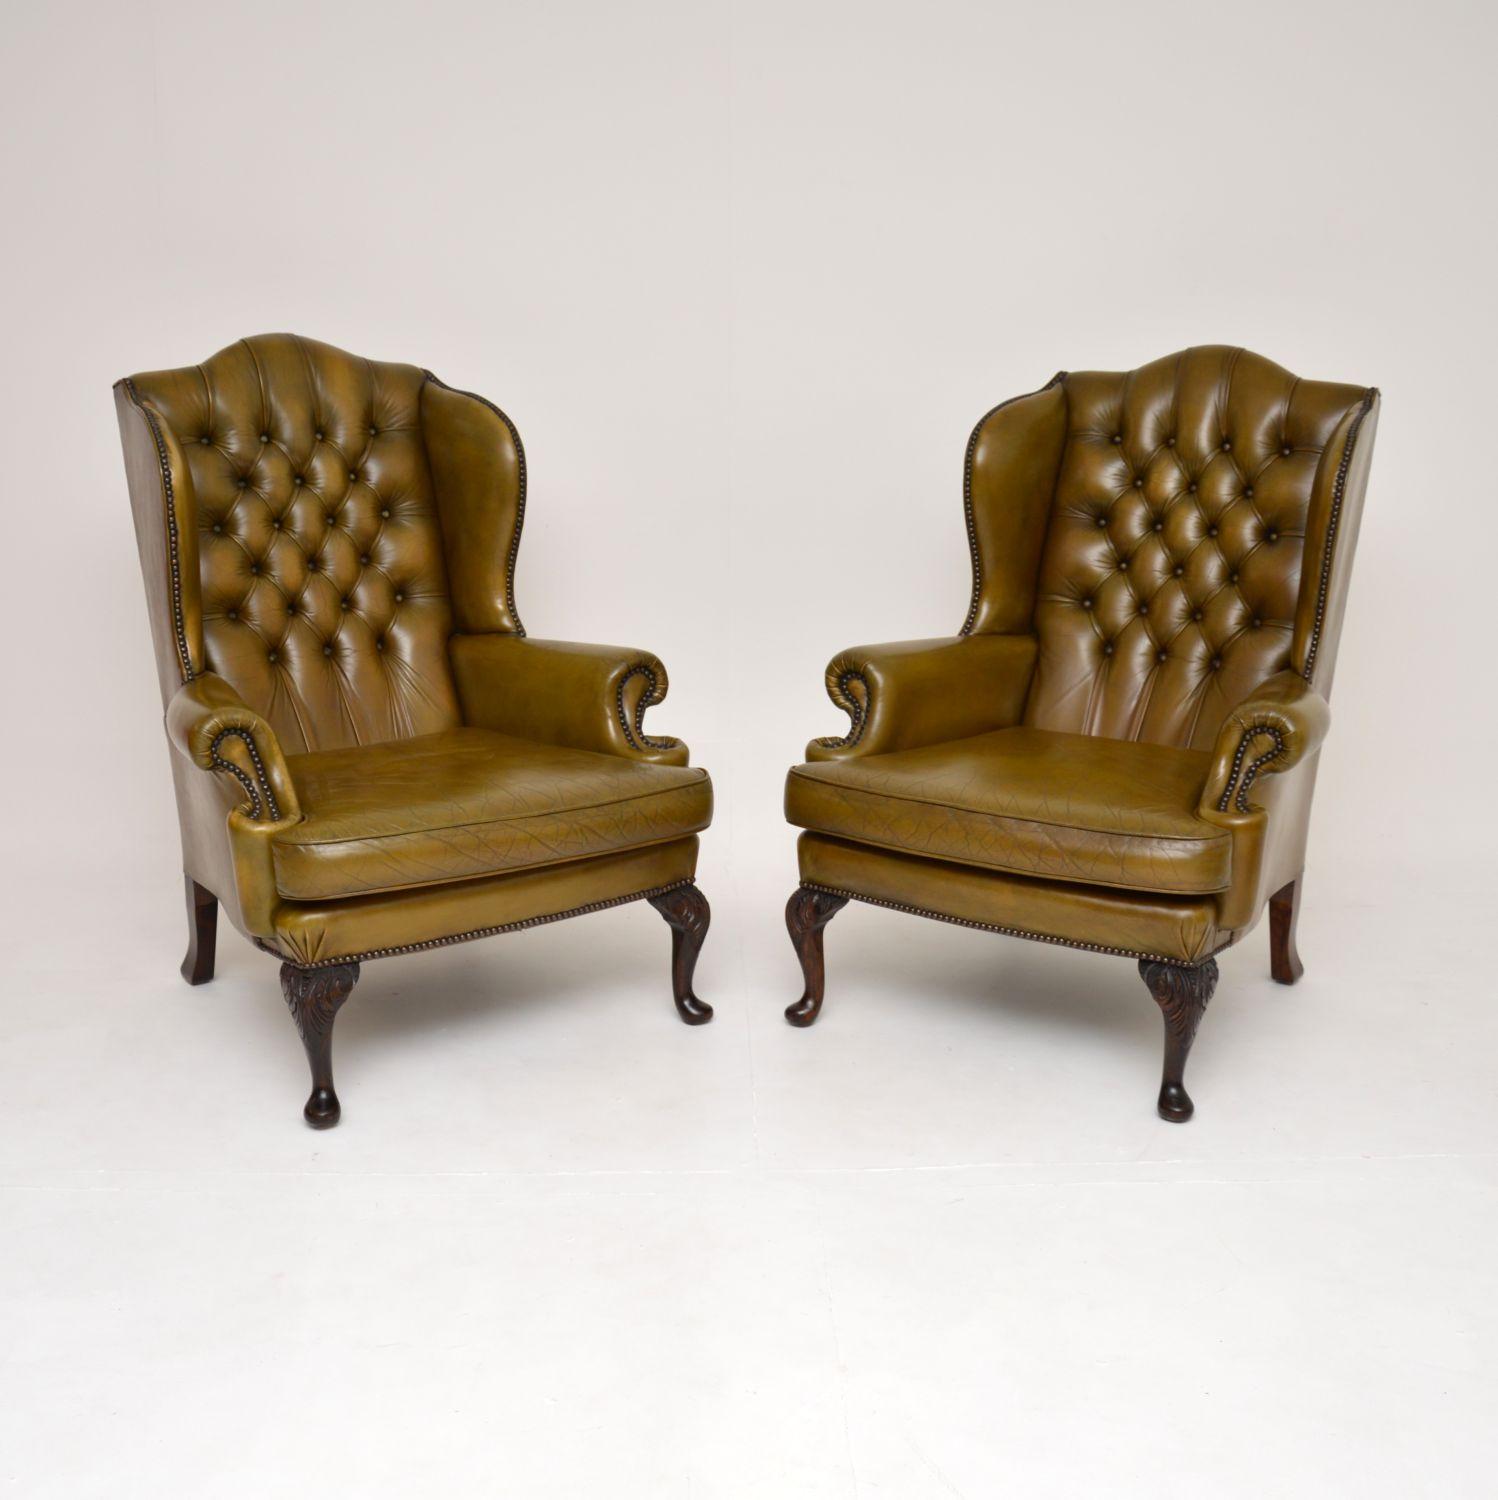 A fantastic pair of antique green leather wing back armchairs. They were made in England, they date from around the 1930’s.

The quality is superb and they are extremely comfortable to relax in. The green leather has a gorgeous colour tone and